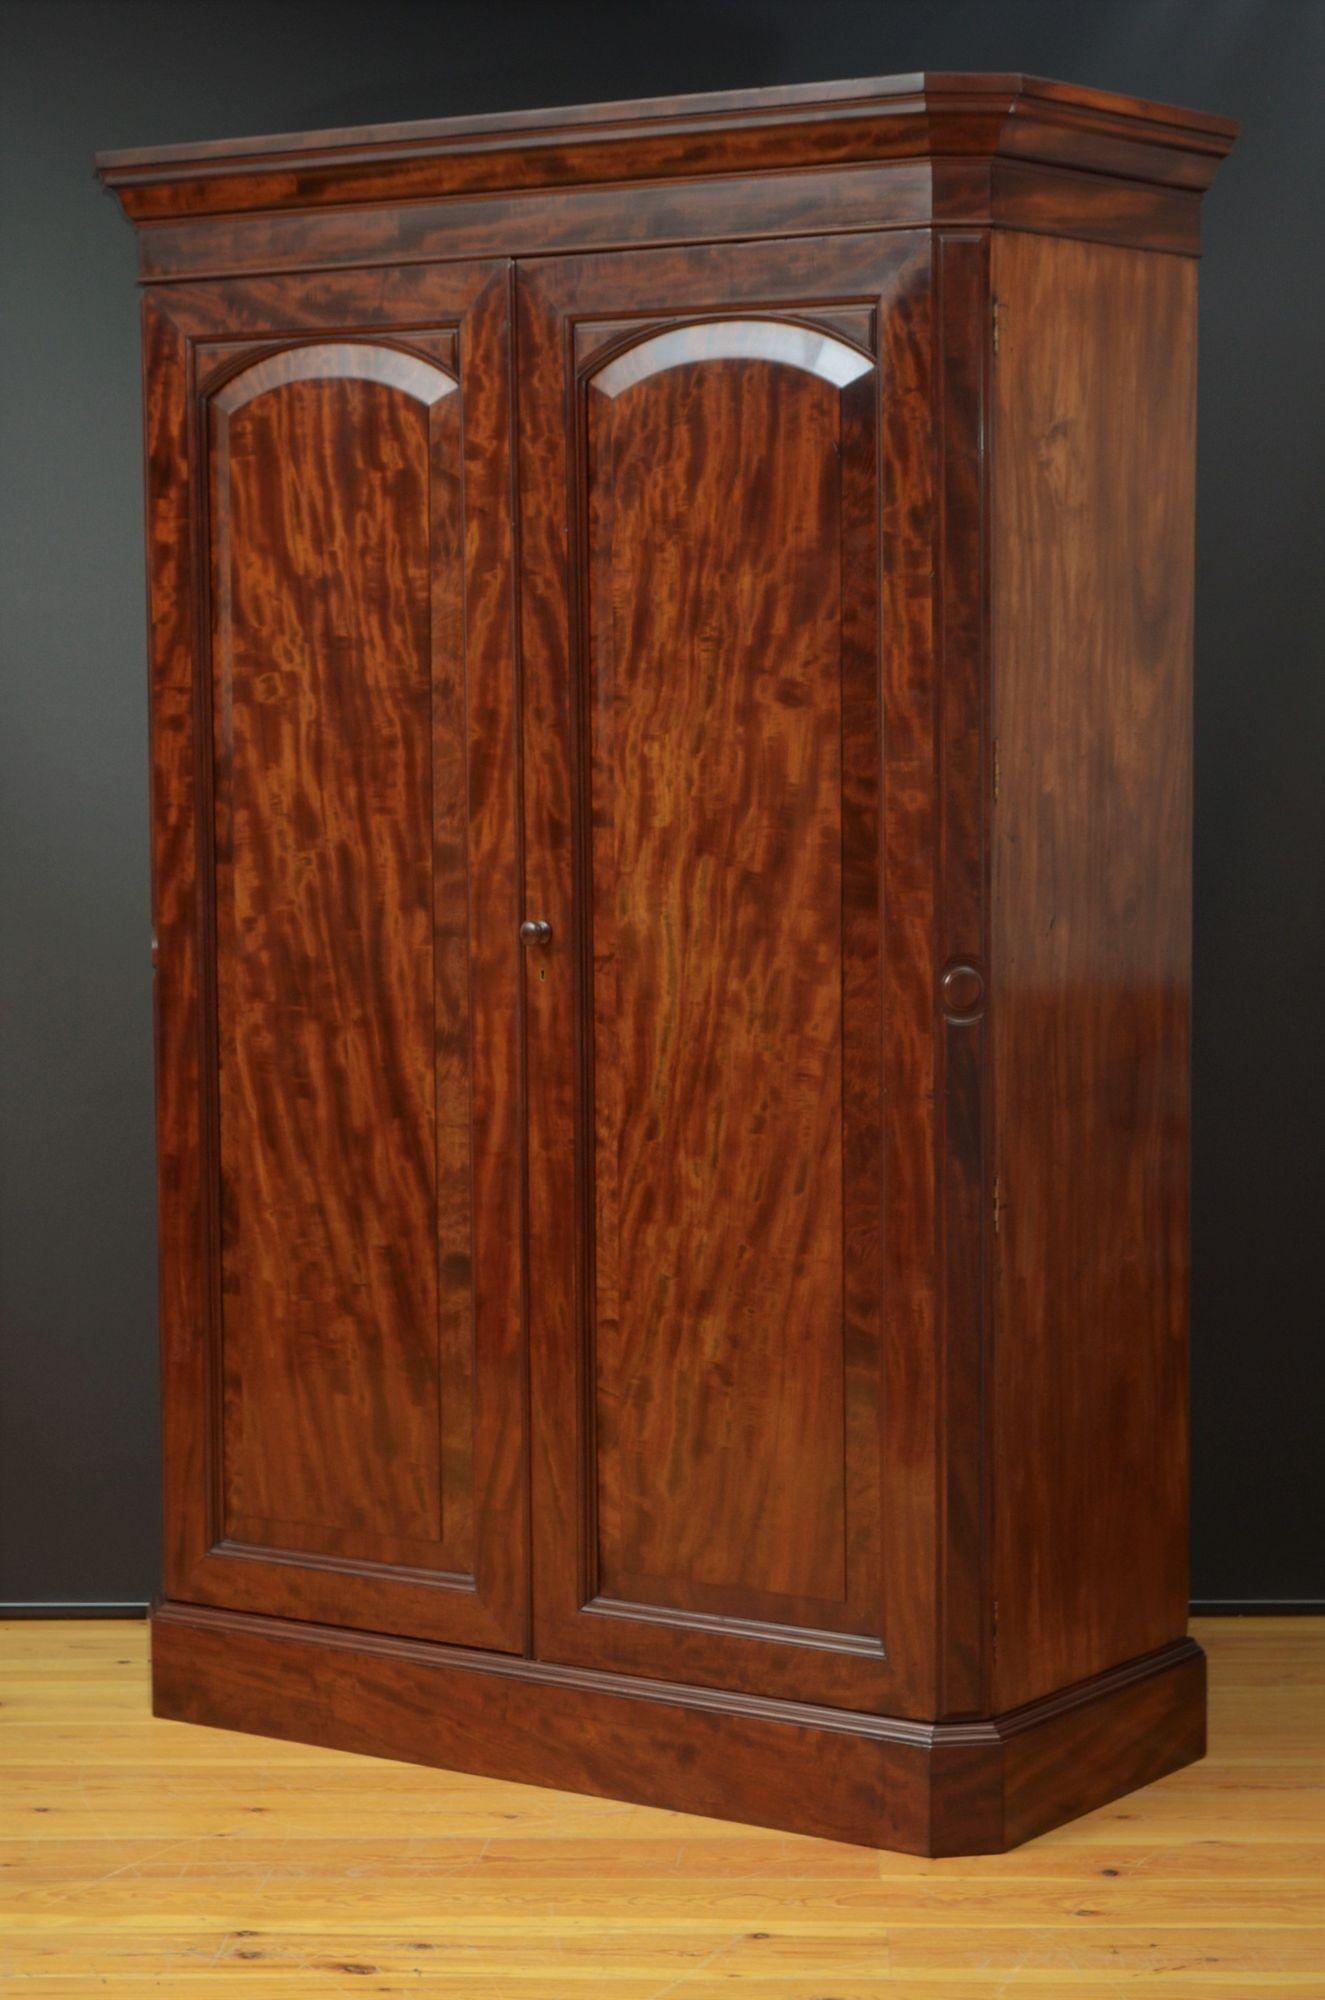 Sn5429  Fine quality and very attractive Victorian wardrobe, having cavetto cornice with canted corners above a pair of fielded and panelled figured mahogany doors with canted corners, enclosing long hanging section with a storage compartment below